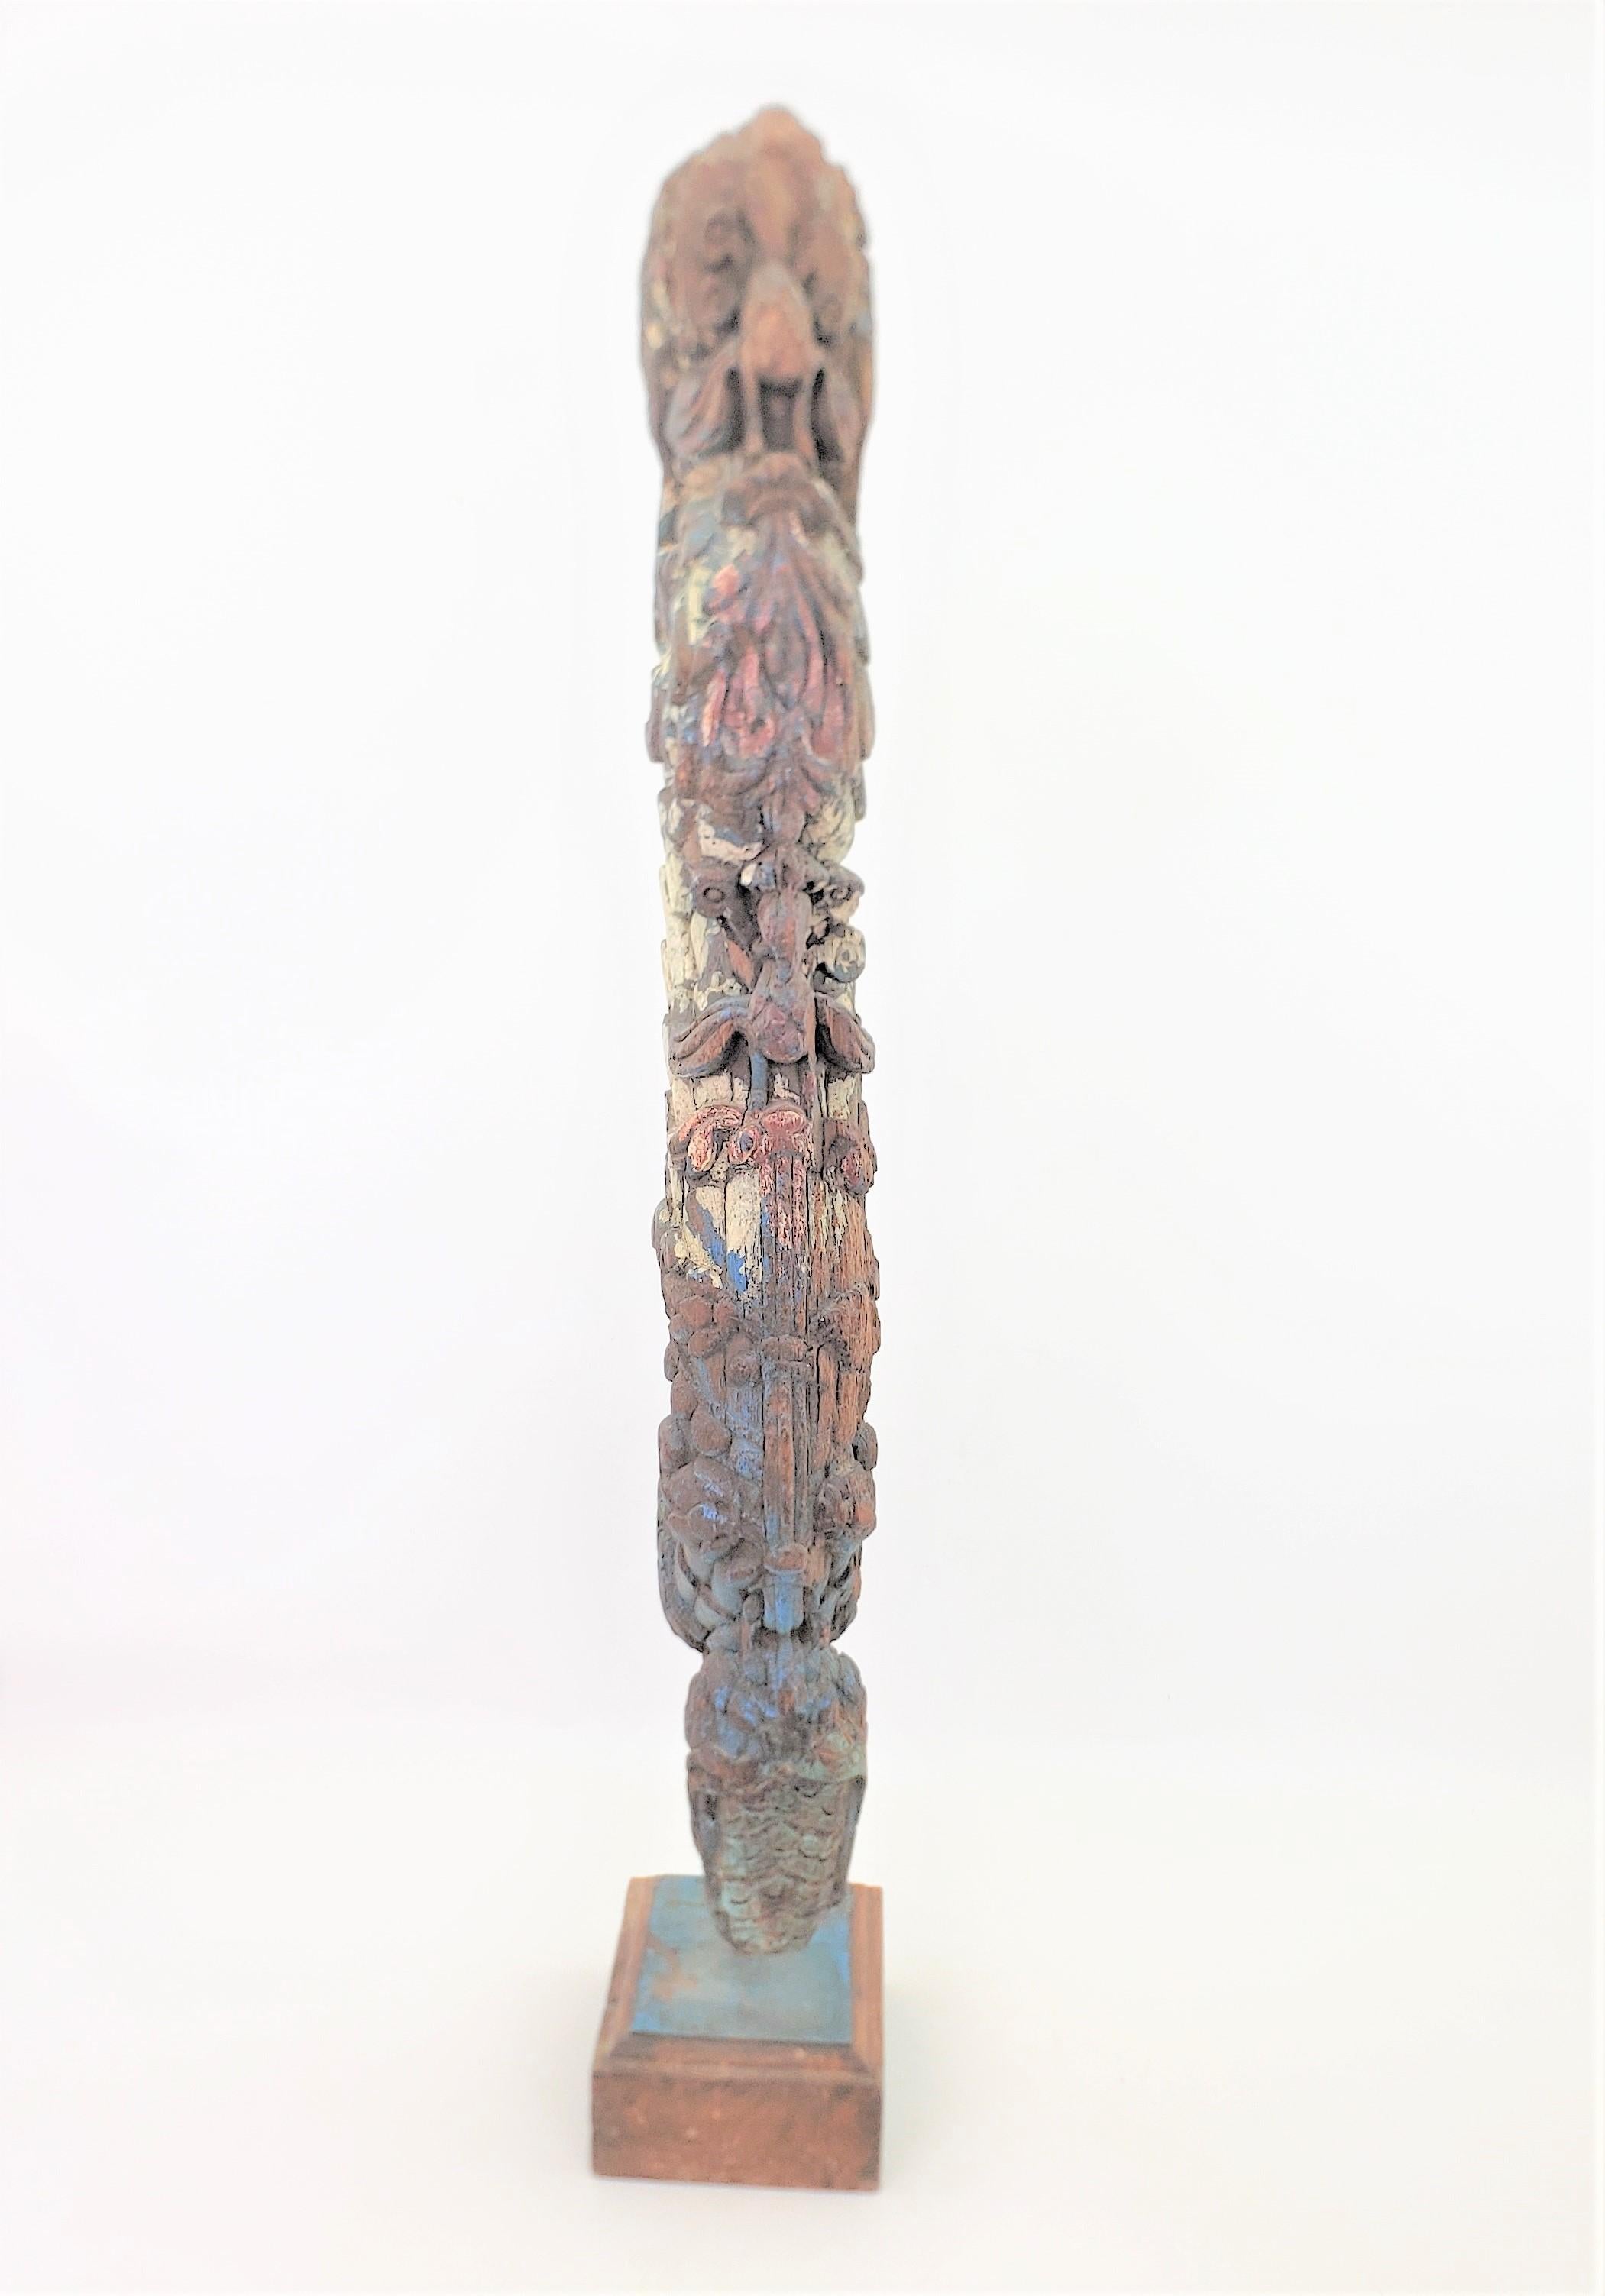 Baroque Antique Hand-Carved & Painted Wooden Mounted Architectural or Nautical Fragment For Sale